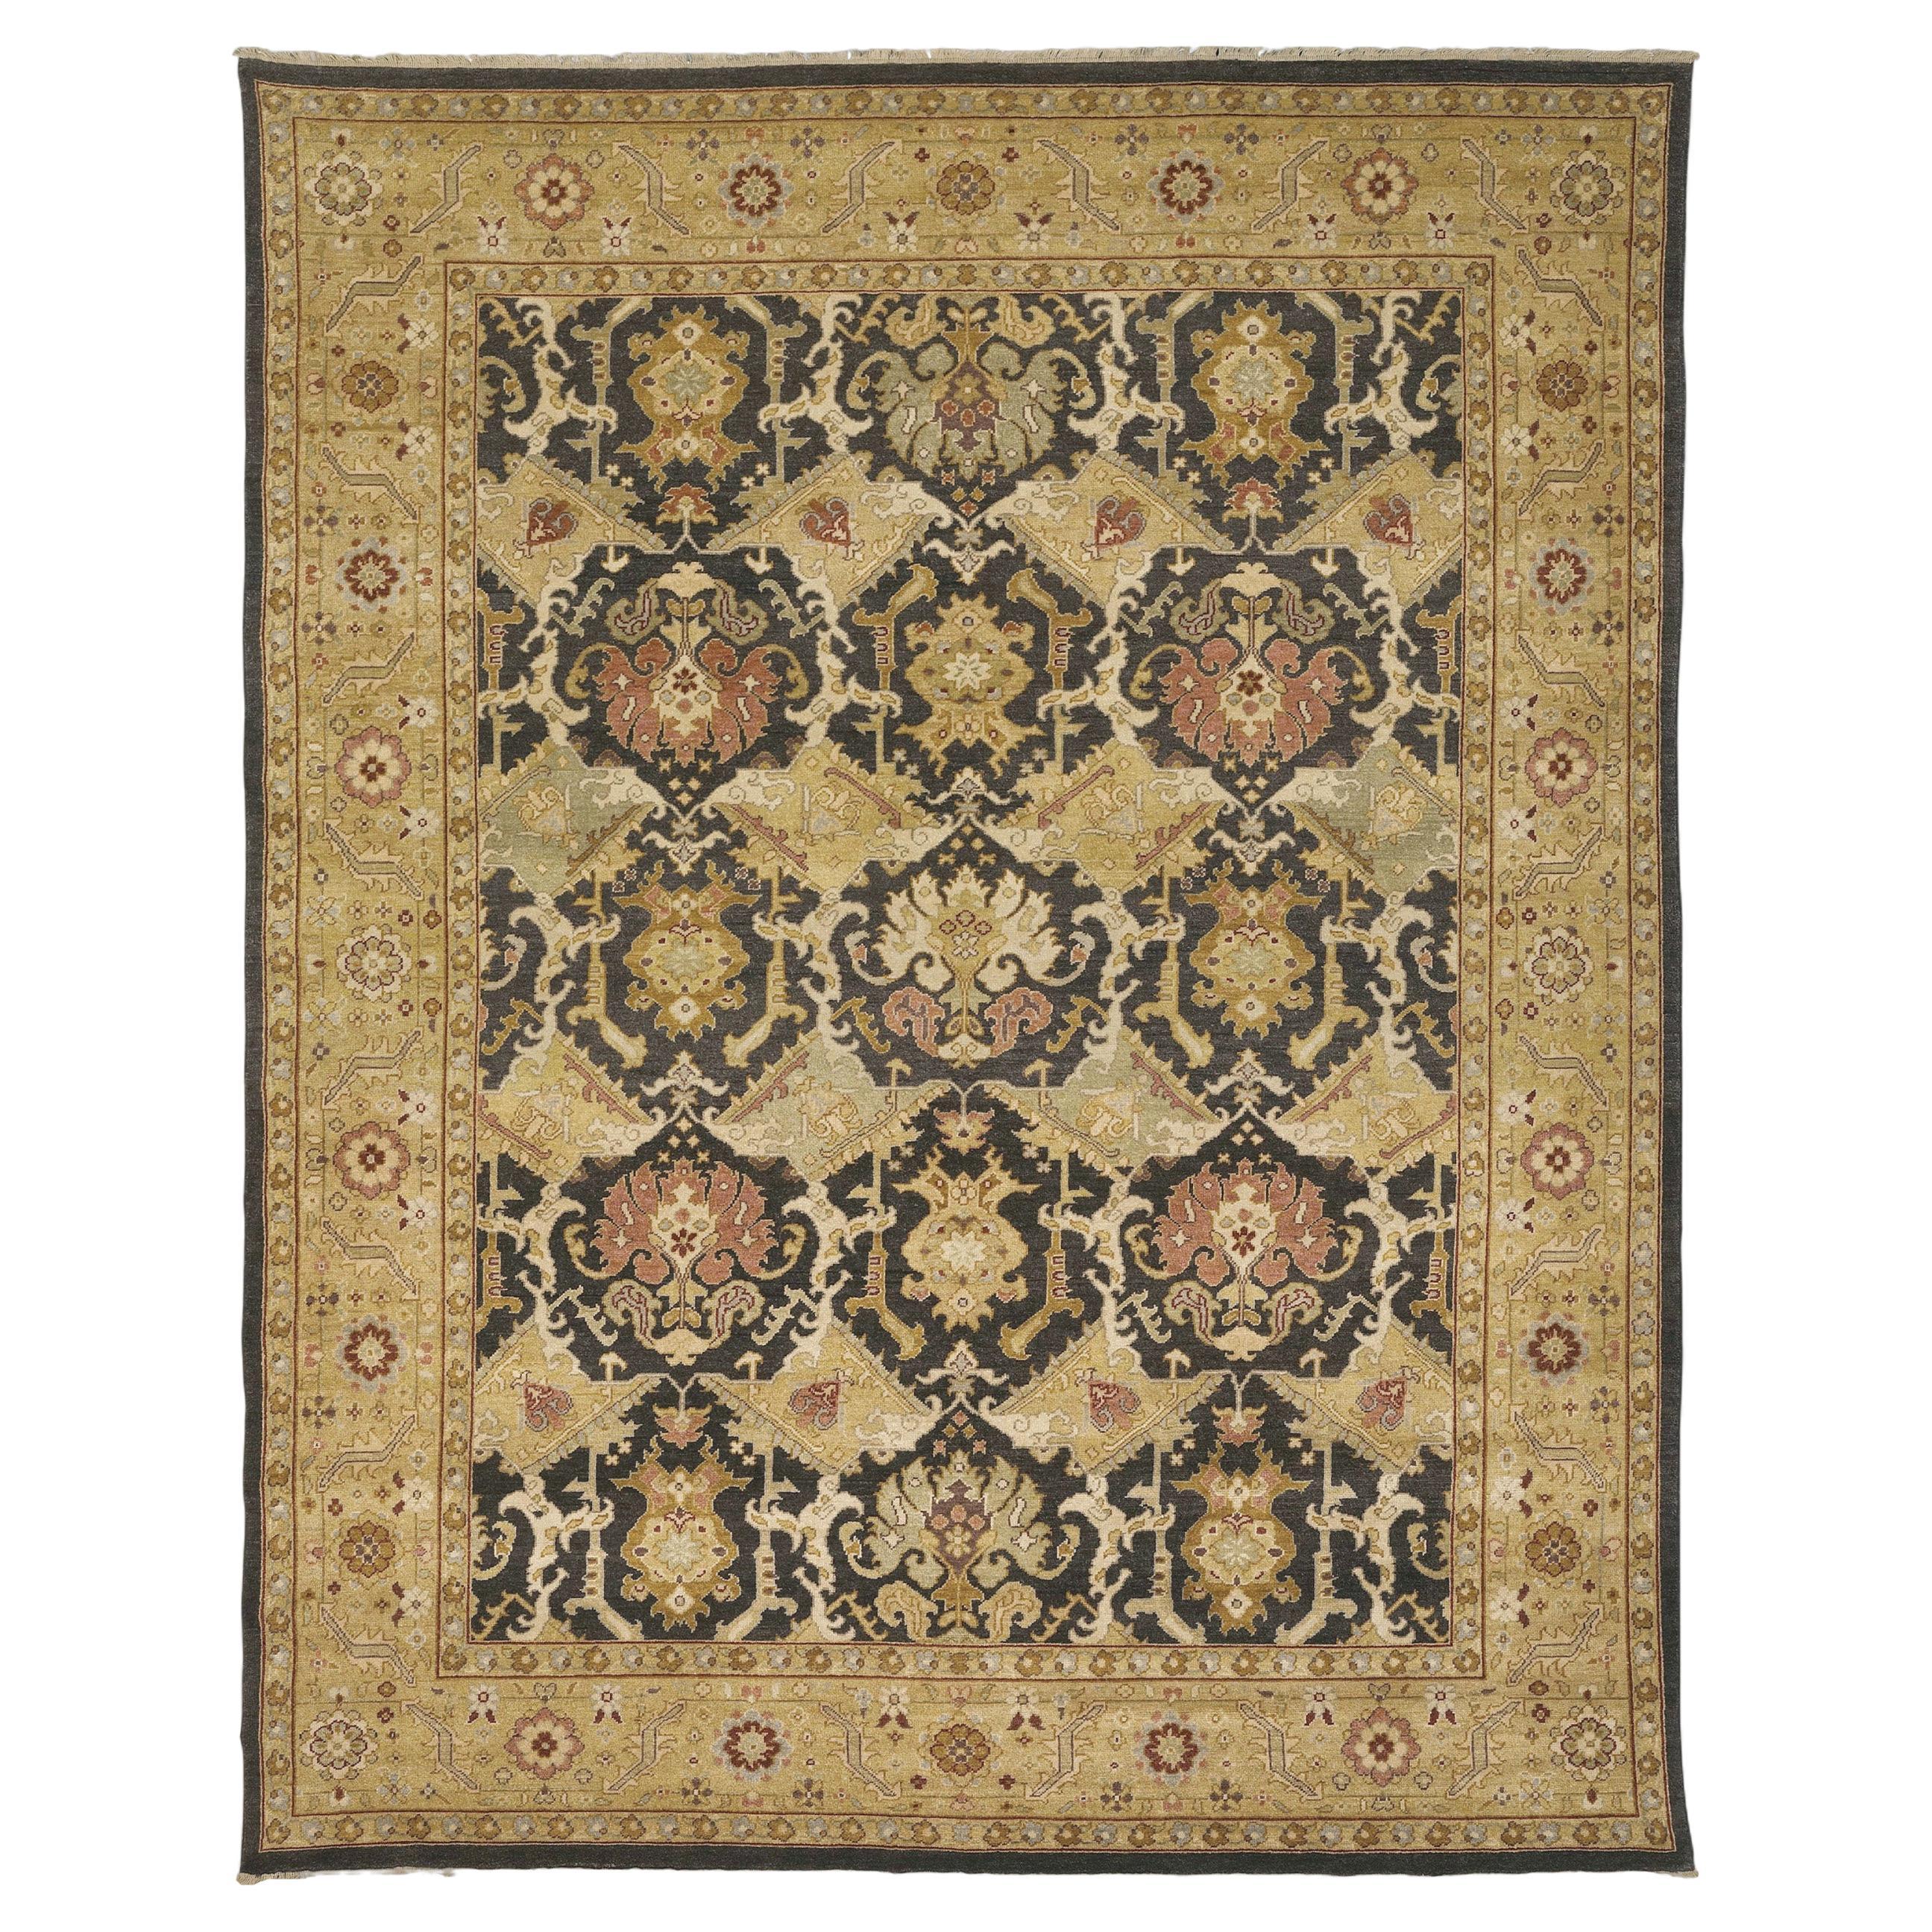 Luxury Modern Hand-Knotted Mahal Brown/Gold 12x15 Rug